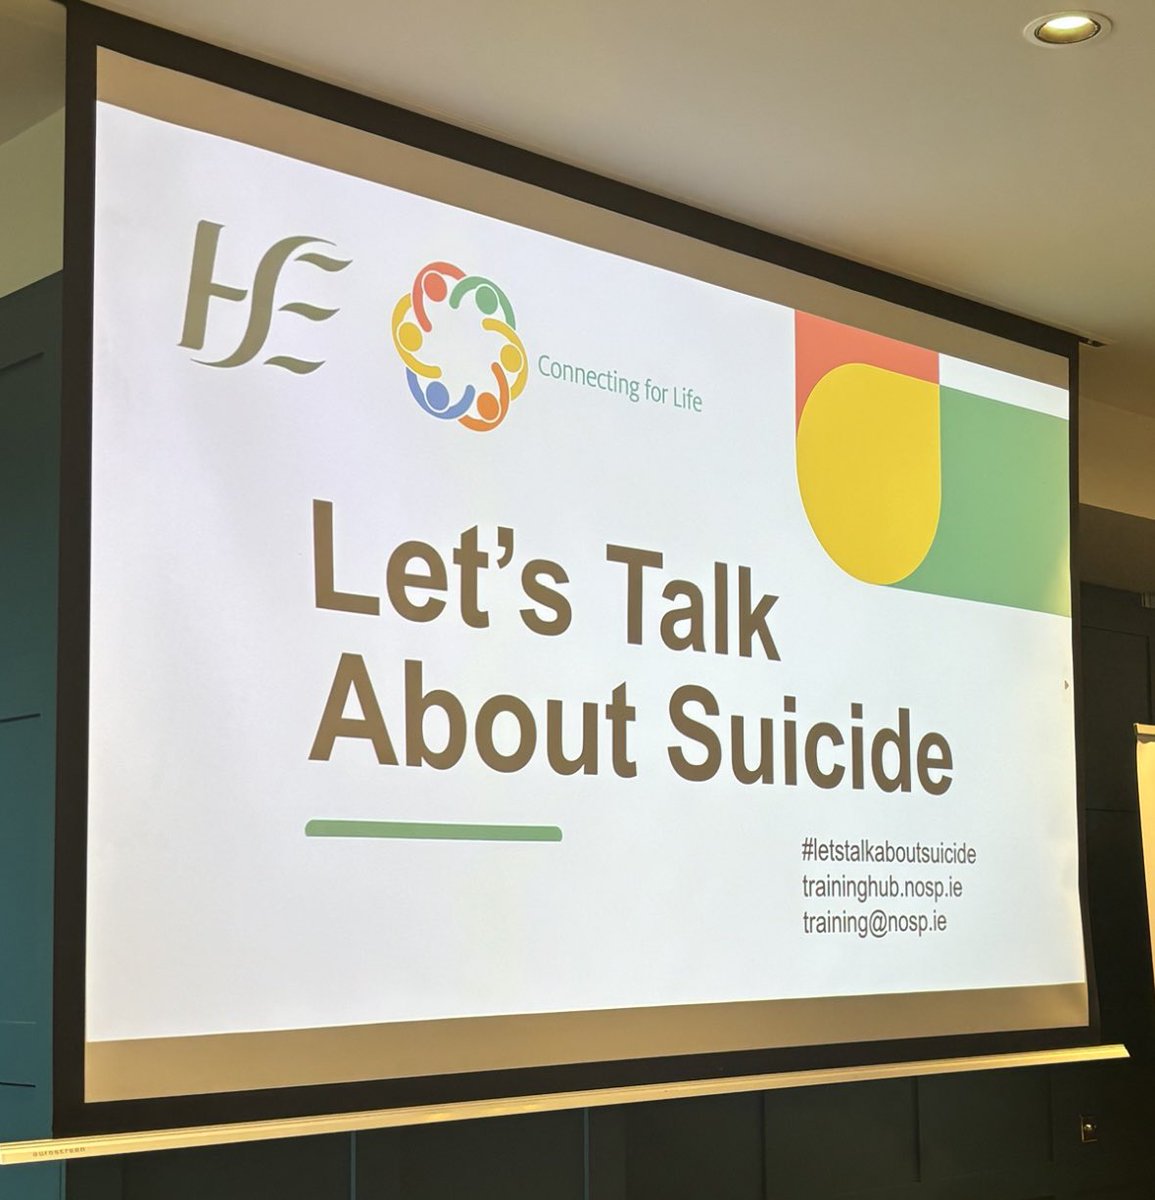 #Letstalkaboutsuicide. Today I launched a new free online, suicide prevention training programme. This important new resource, a collaboration @HSELive @NOSPIreland helps people develop their skills to keep others safe from suicide. Check it out. traininghub.nosp.ie